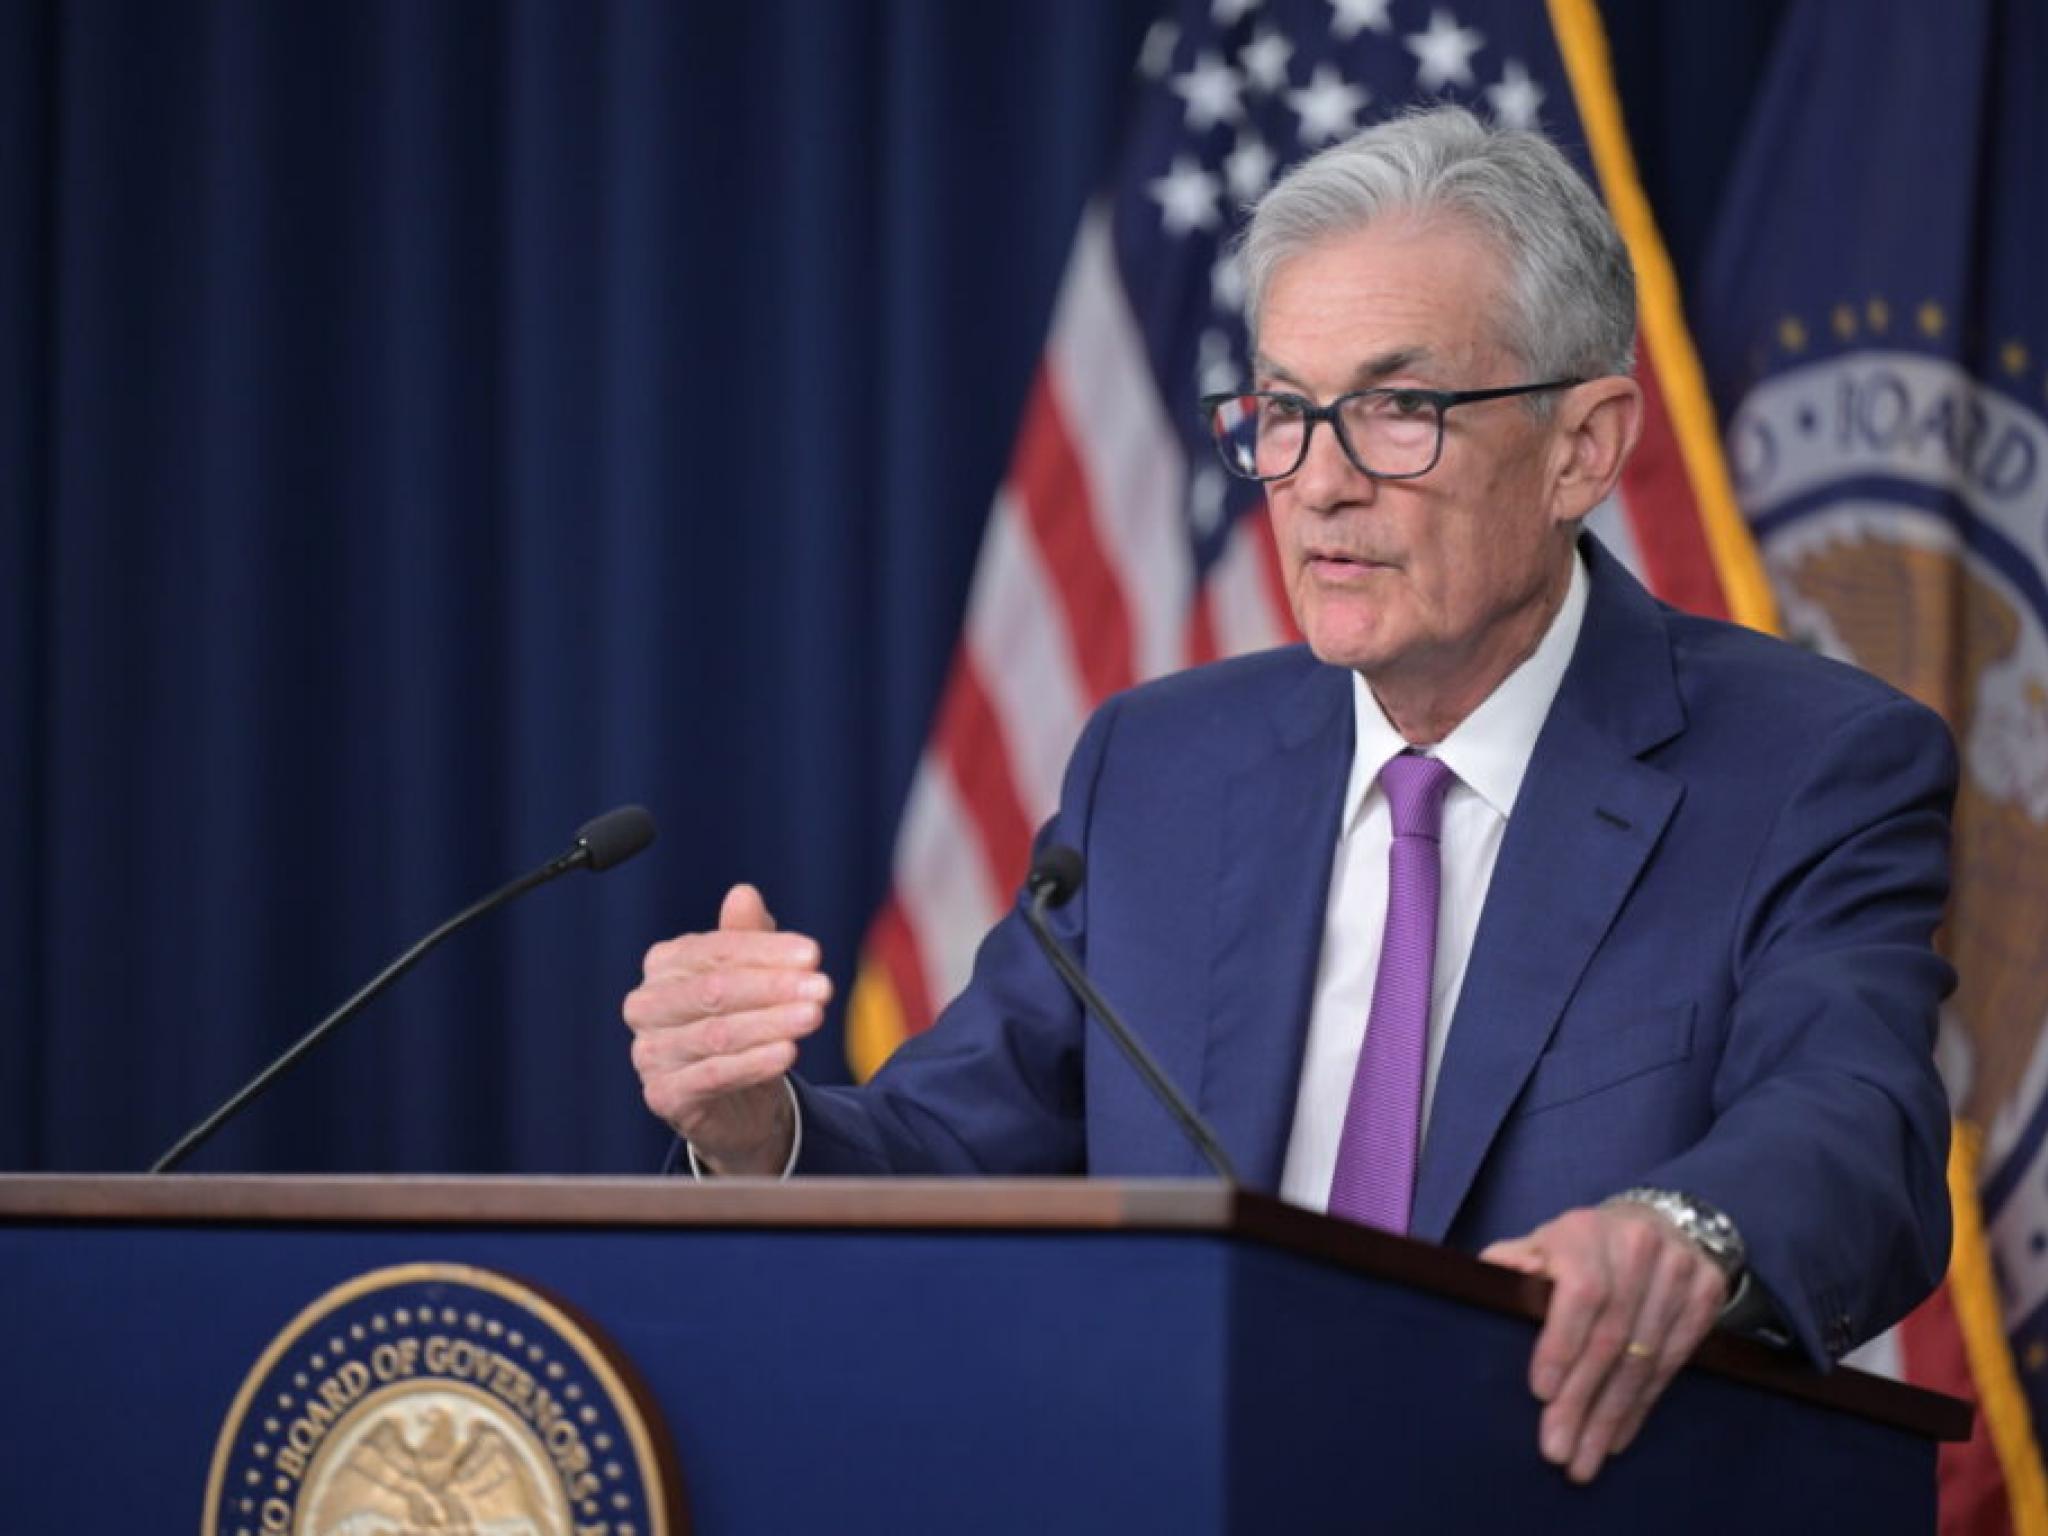  powell-keeps-hawks-at-bay-says-interest-rate-hike-unlikely-stocks-gold-rally-while-treasury-yields-dollar-tumble 